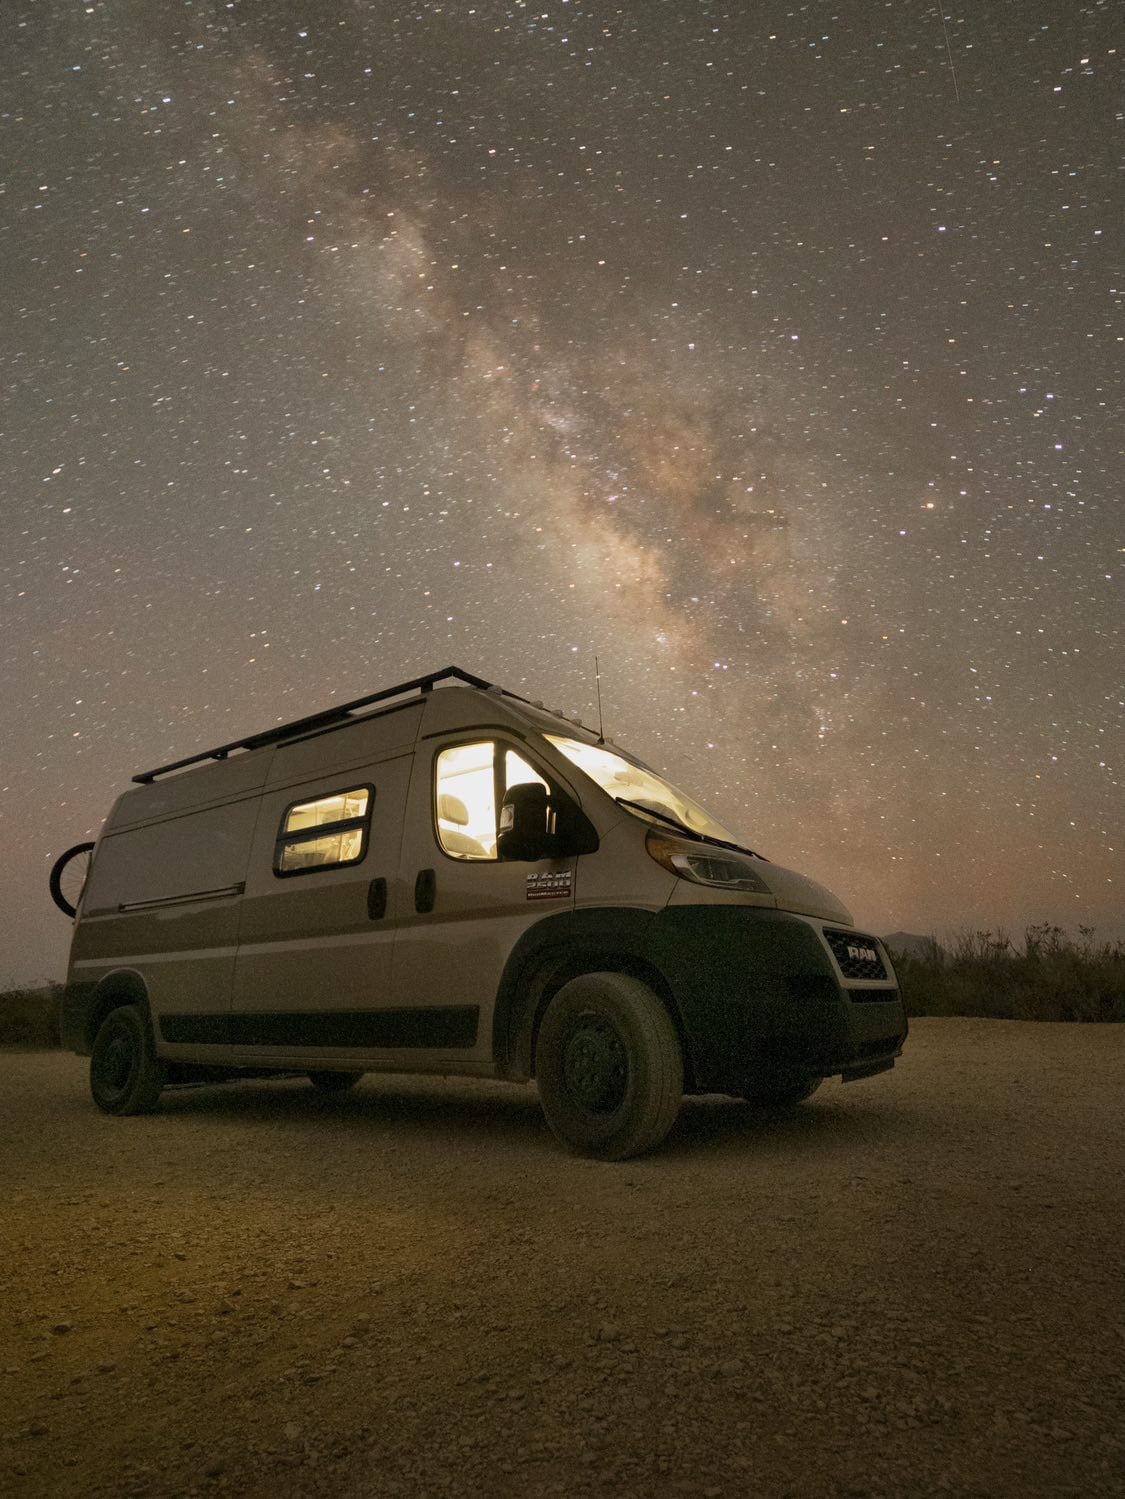 A Dodge Ram van is parked under a starry sky for boondocking